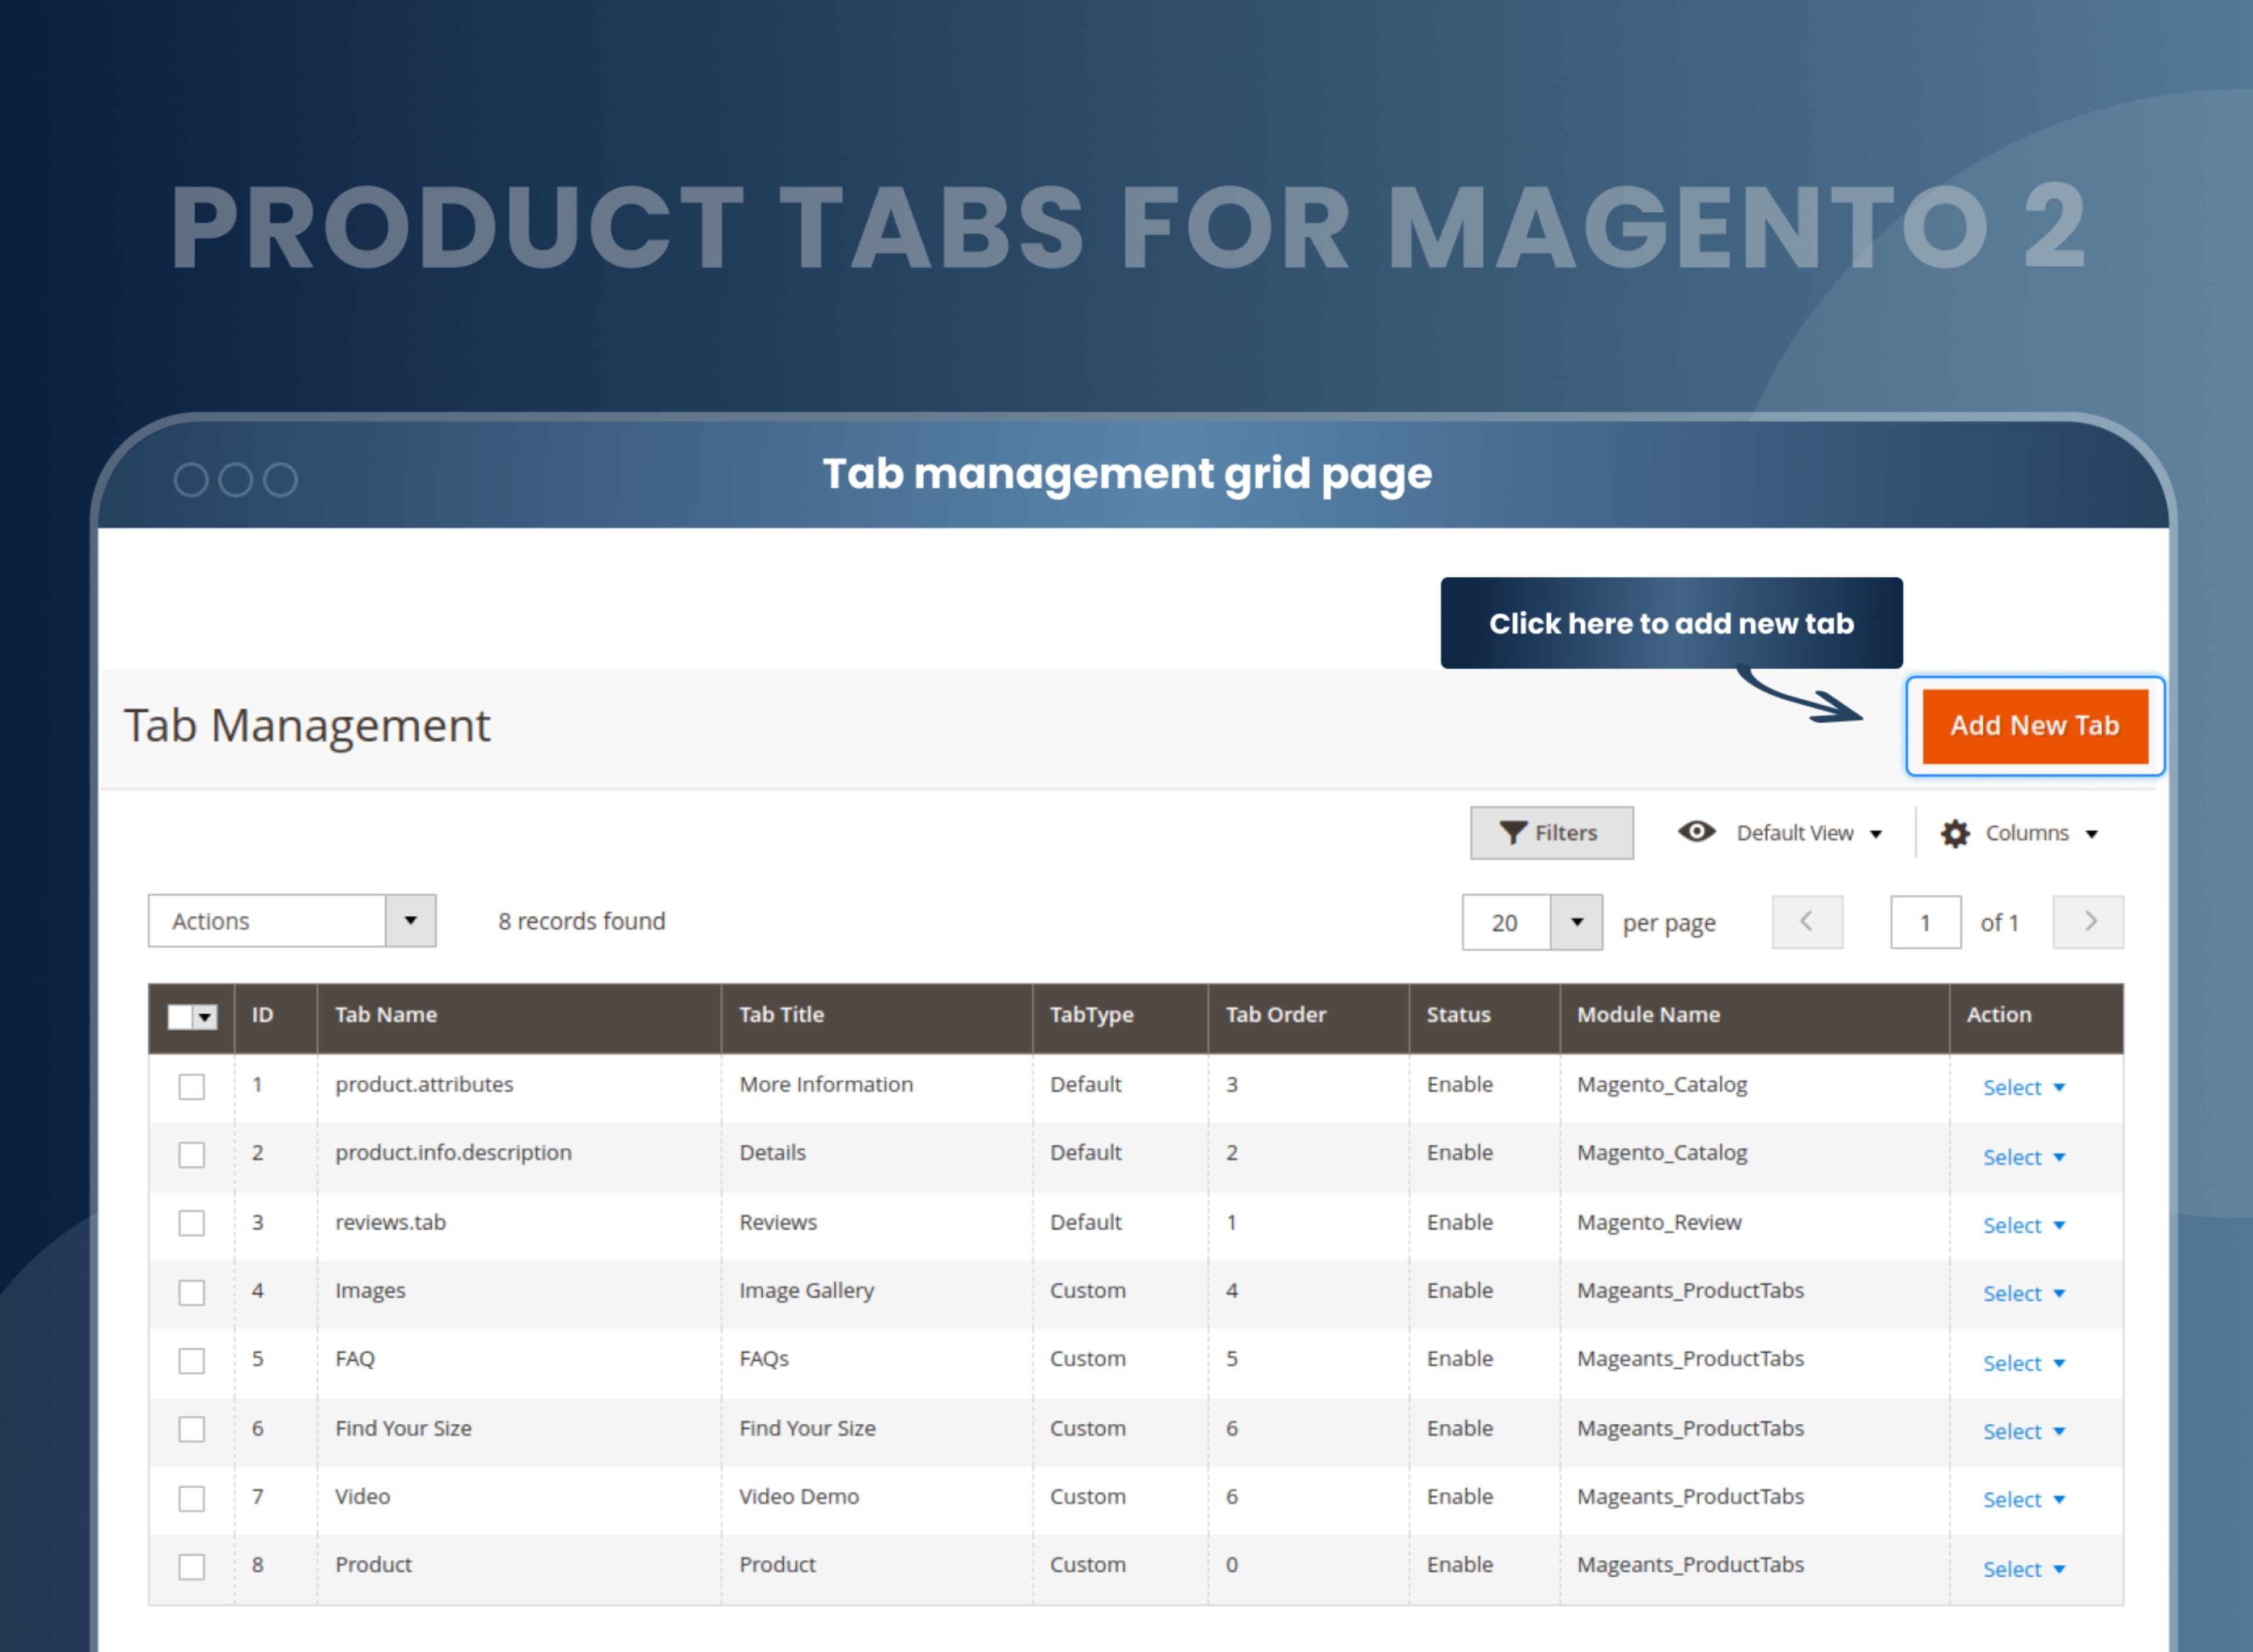 Tab management grid page